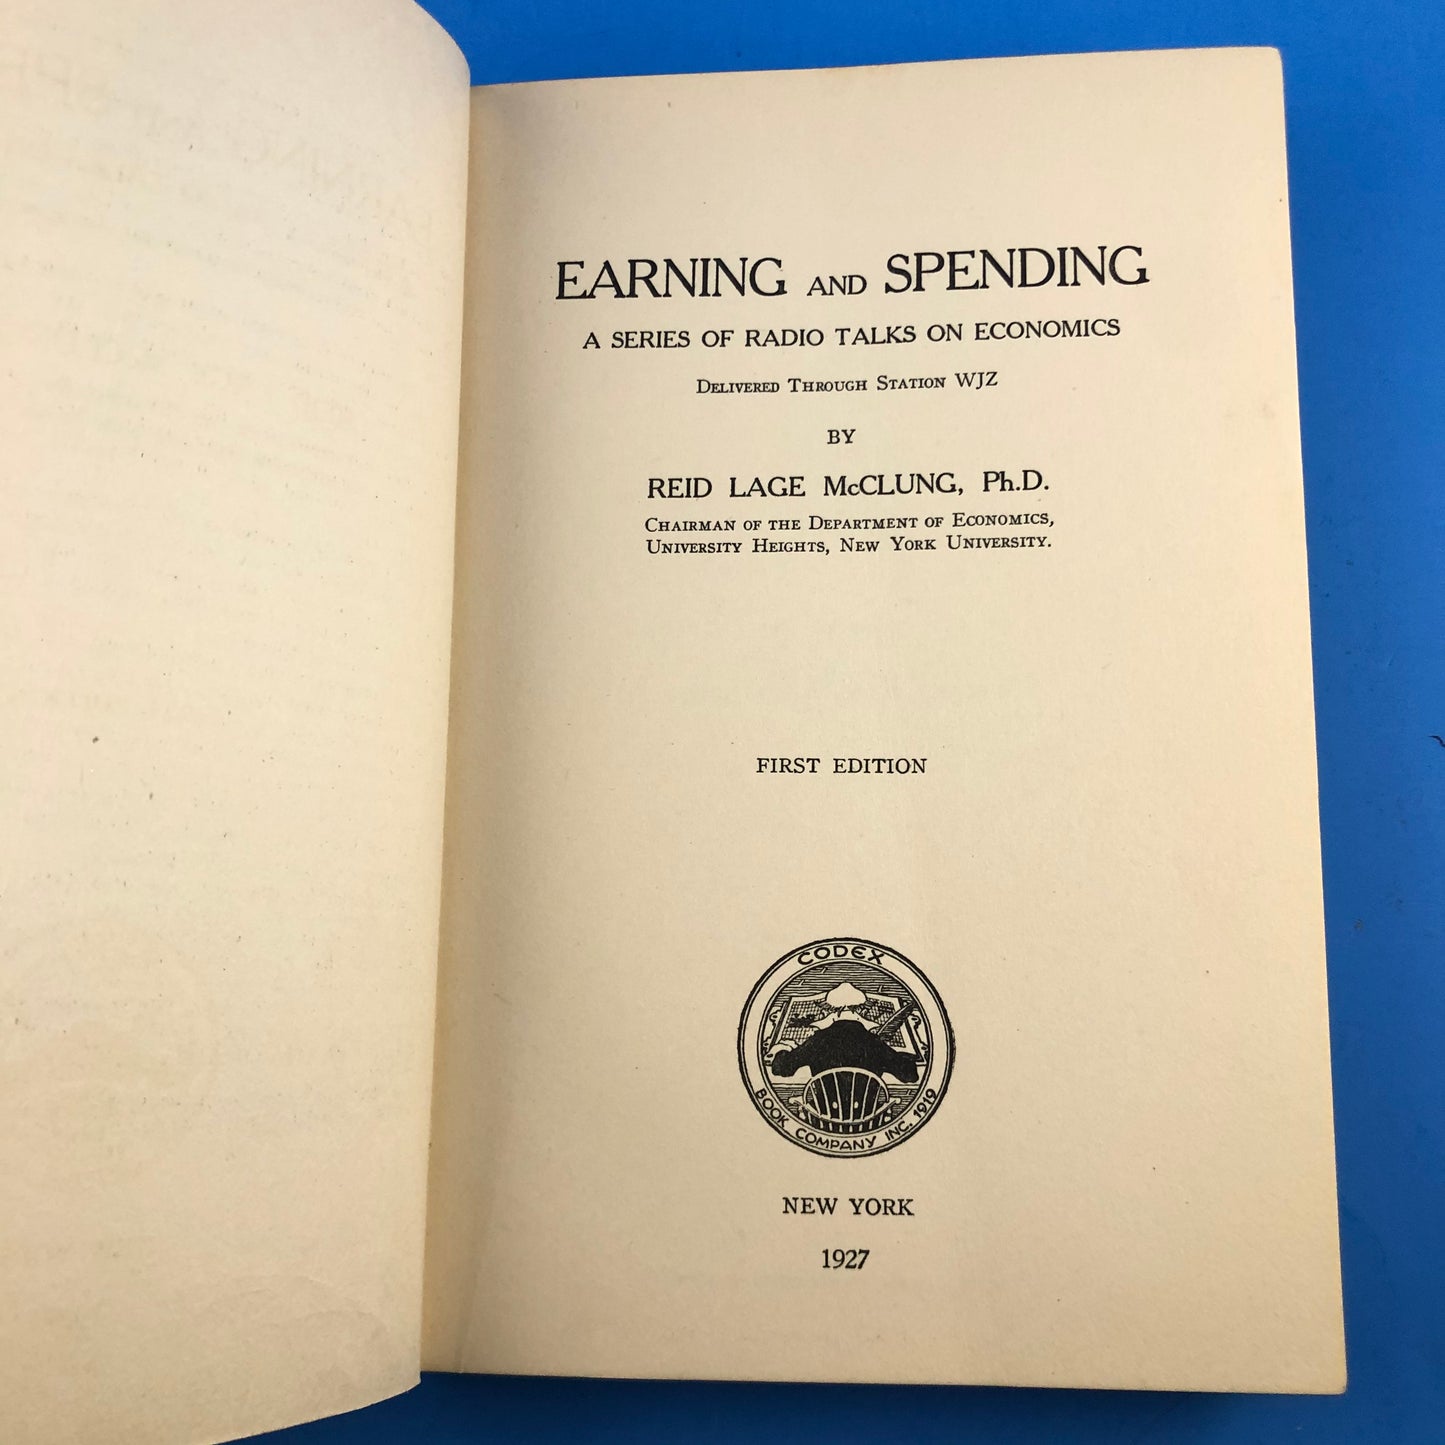 Earning and Spending: A Series of Radio Talks on Economics